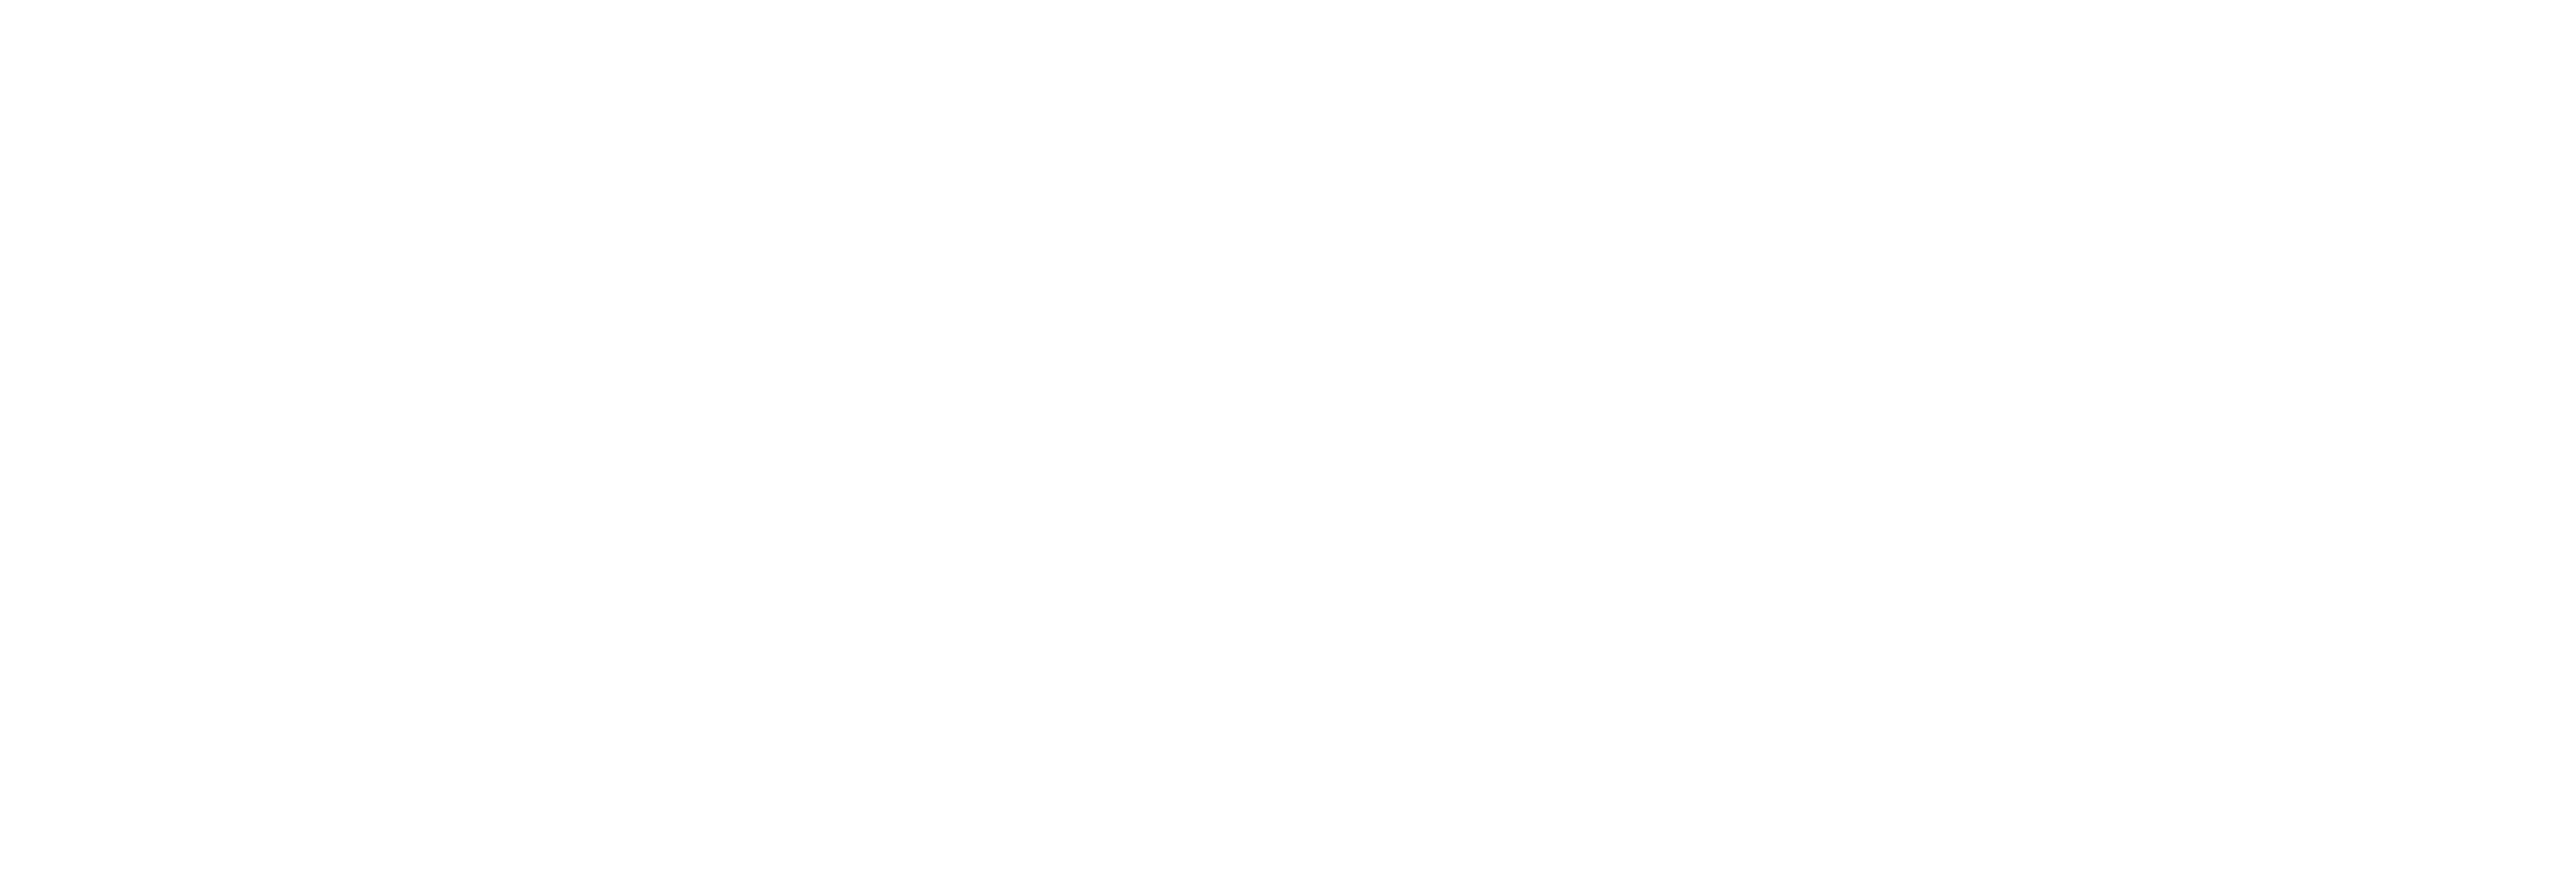 Dependency and Recovery Hampshire logo in white